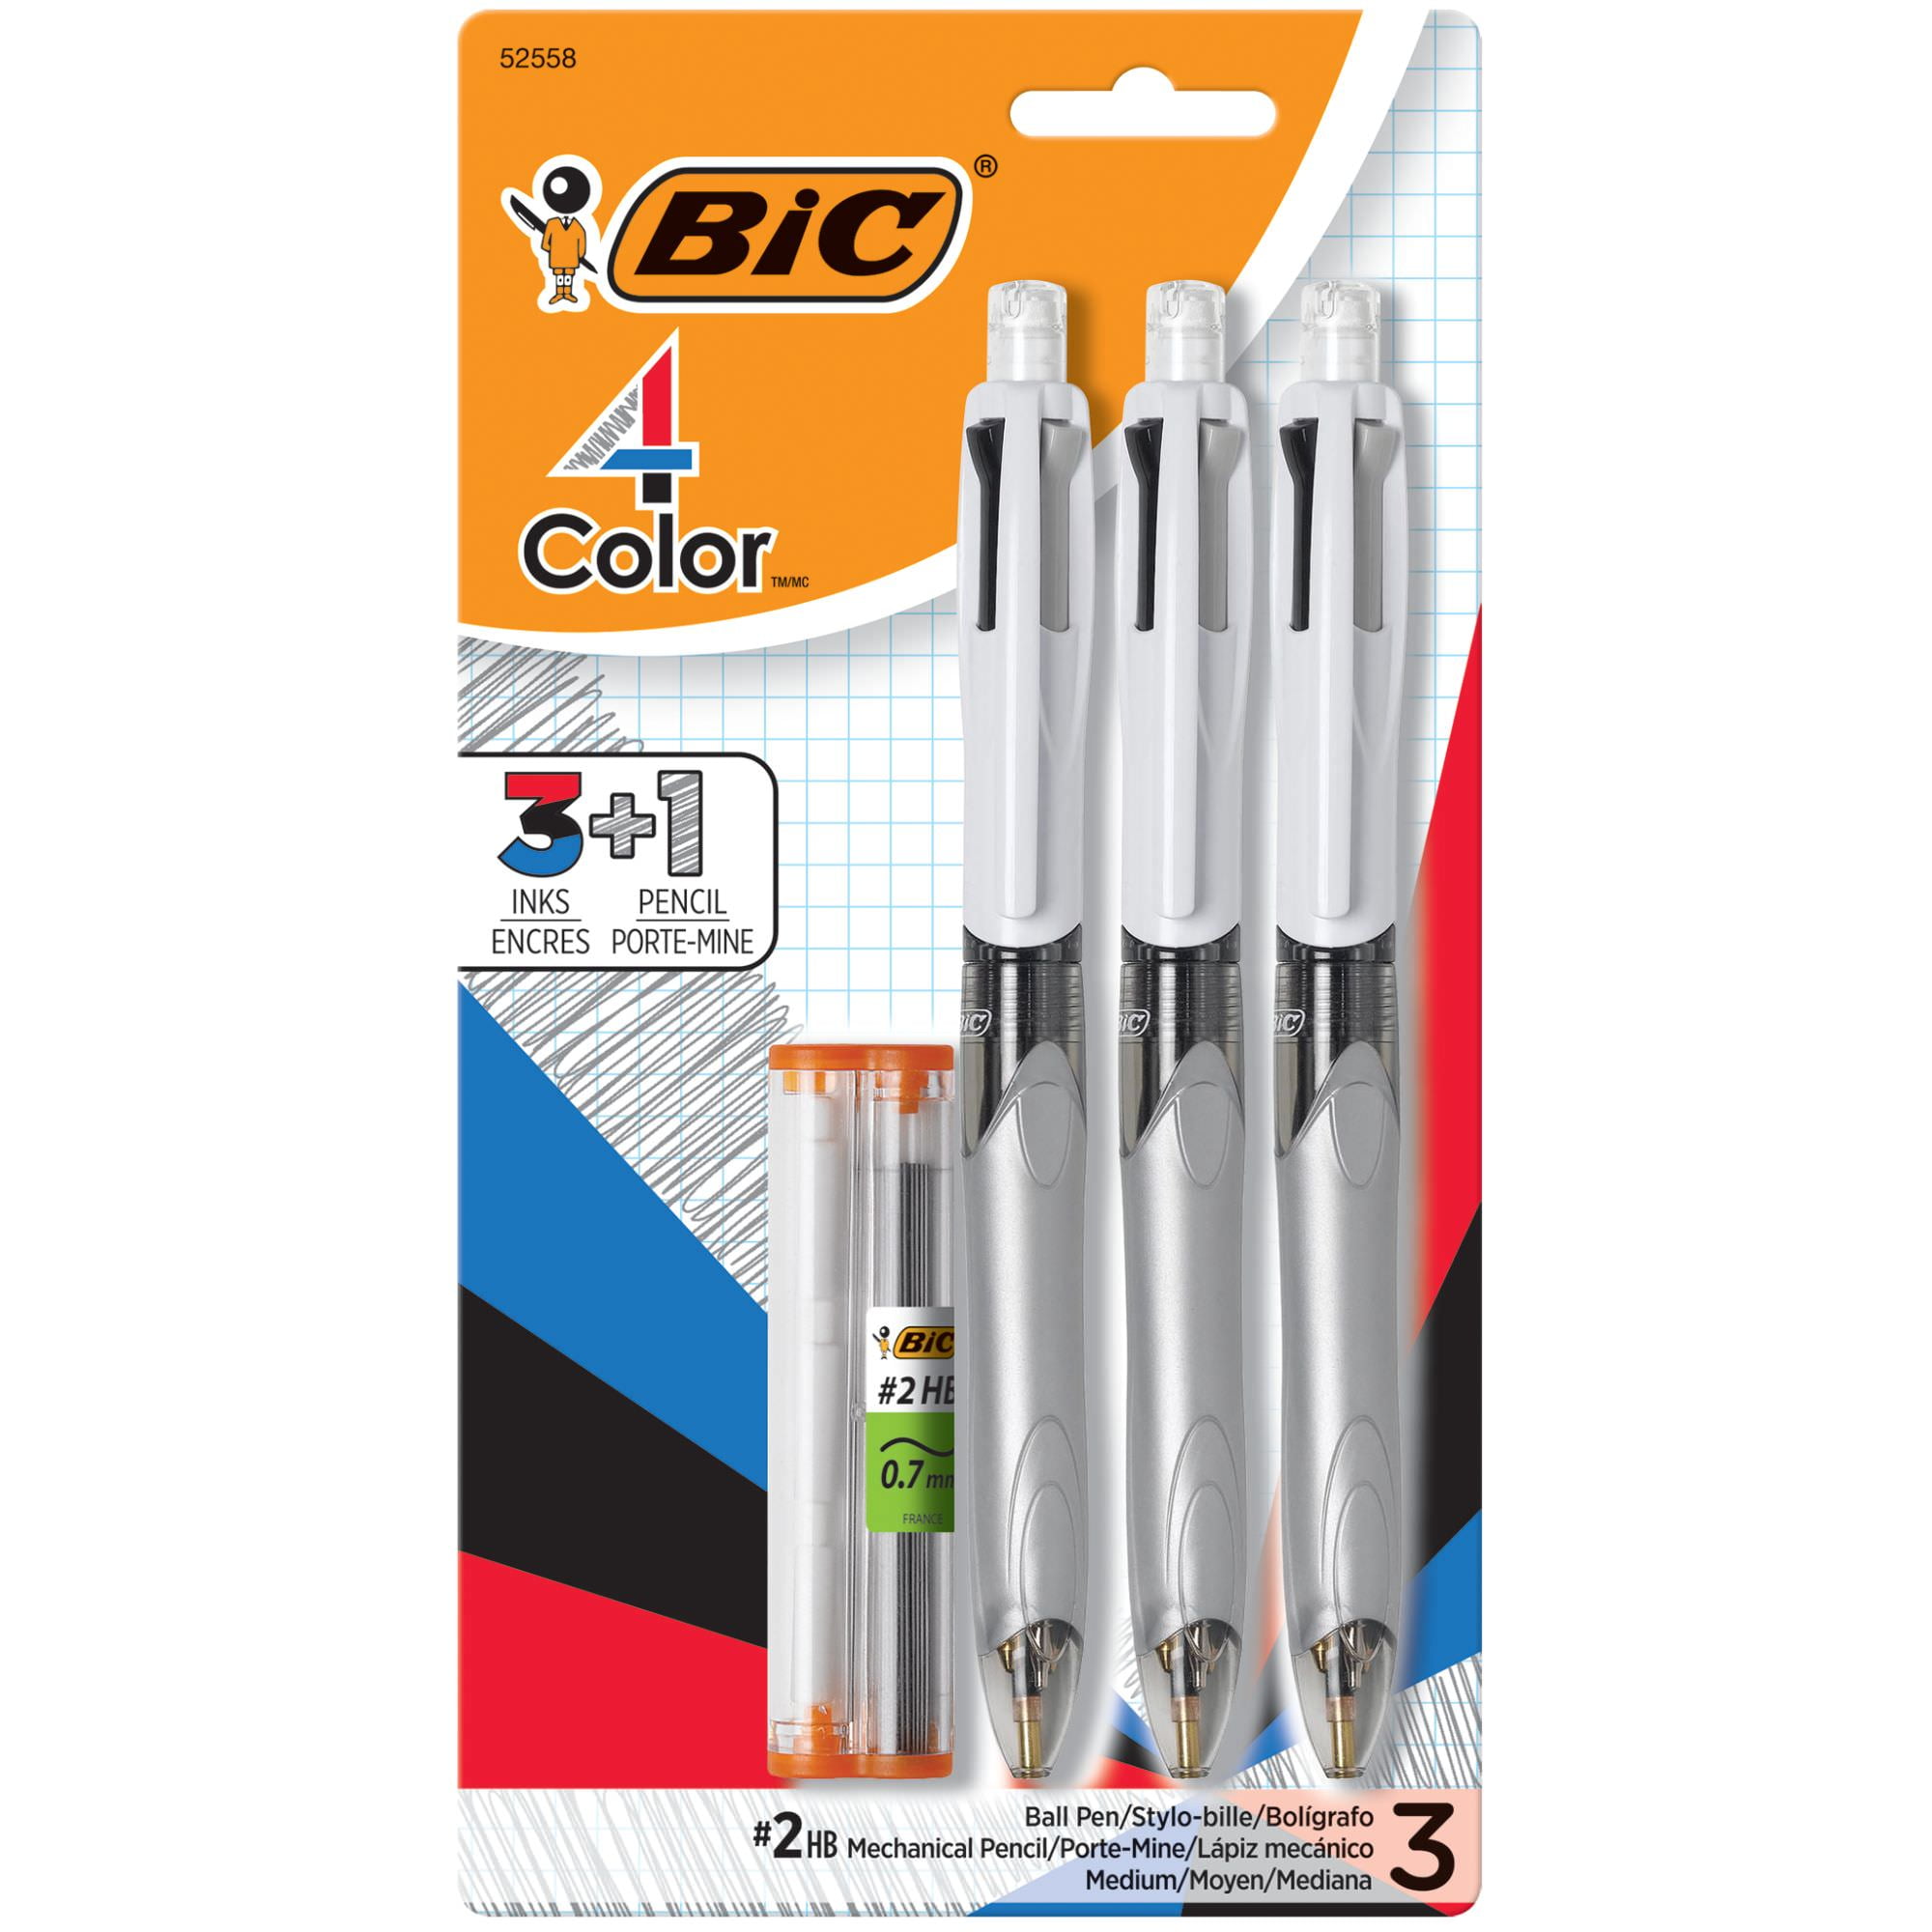 BIC 4-Color Ballpoint Pens, Medium Point (1.0mm), 4 Colors in 1 Set of  Multicolored Pens, 3-Count Pack of Pens for Journaling and Organizing